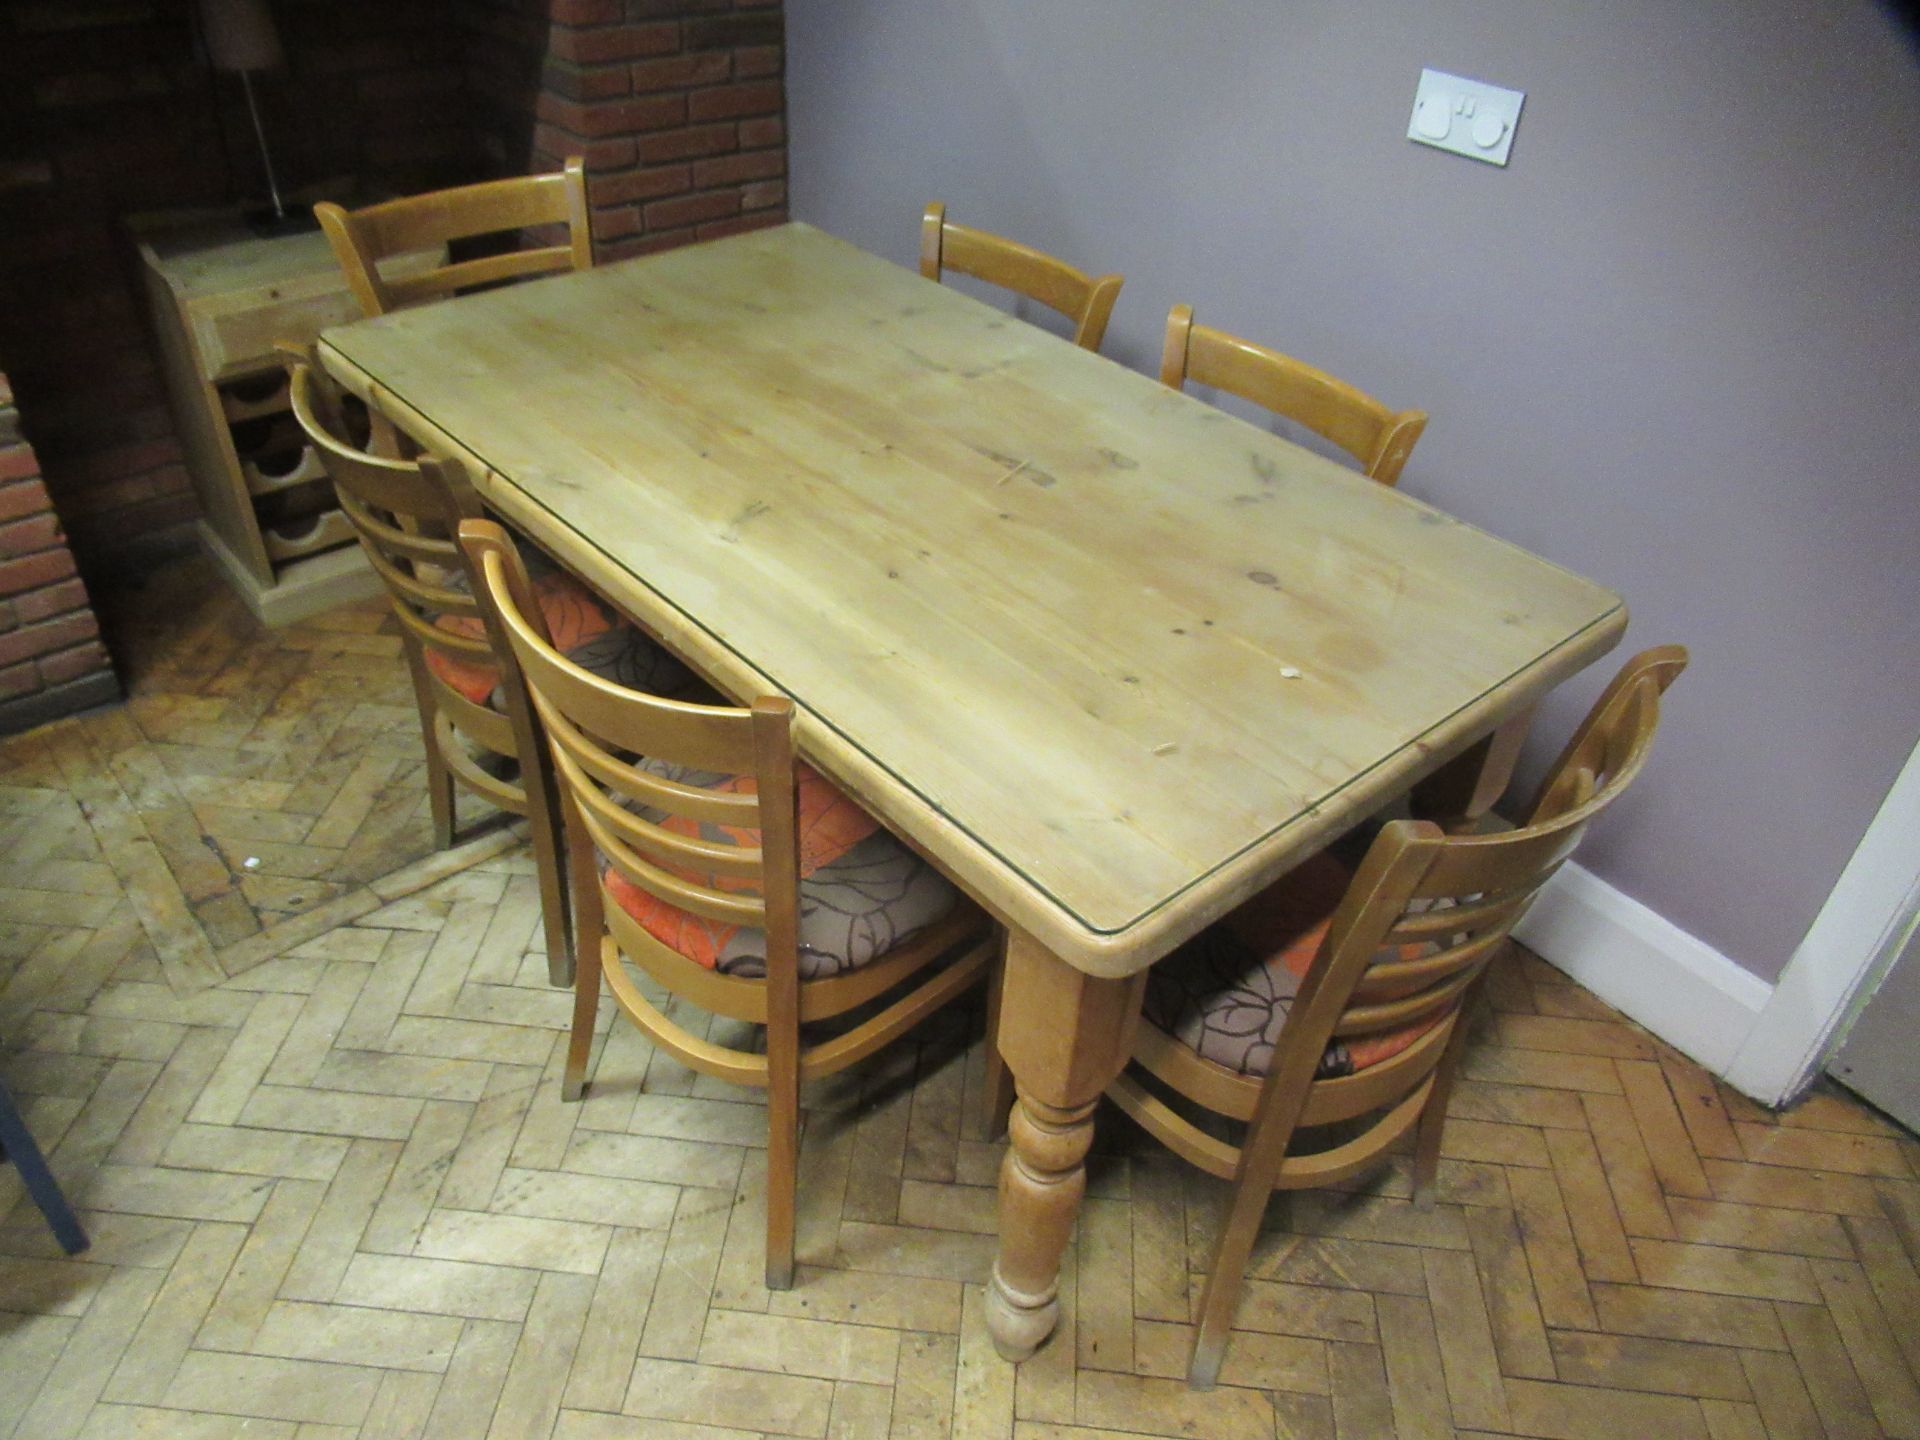 Rectangular Pine Farmhouse Table 150 x 85cm with protective glass cover and 6 ladderback chairs. - Image 2 of 3